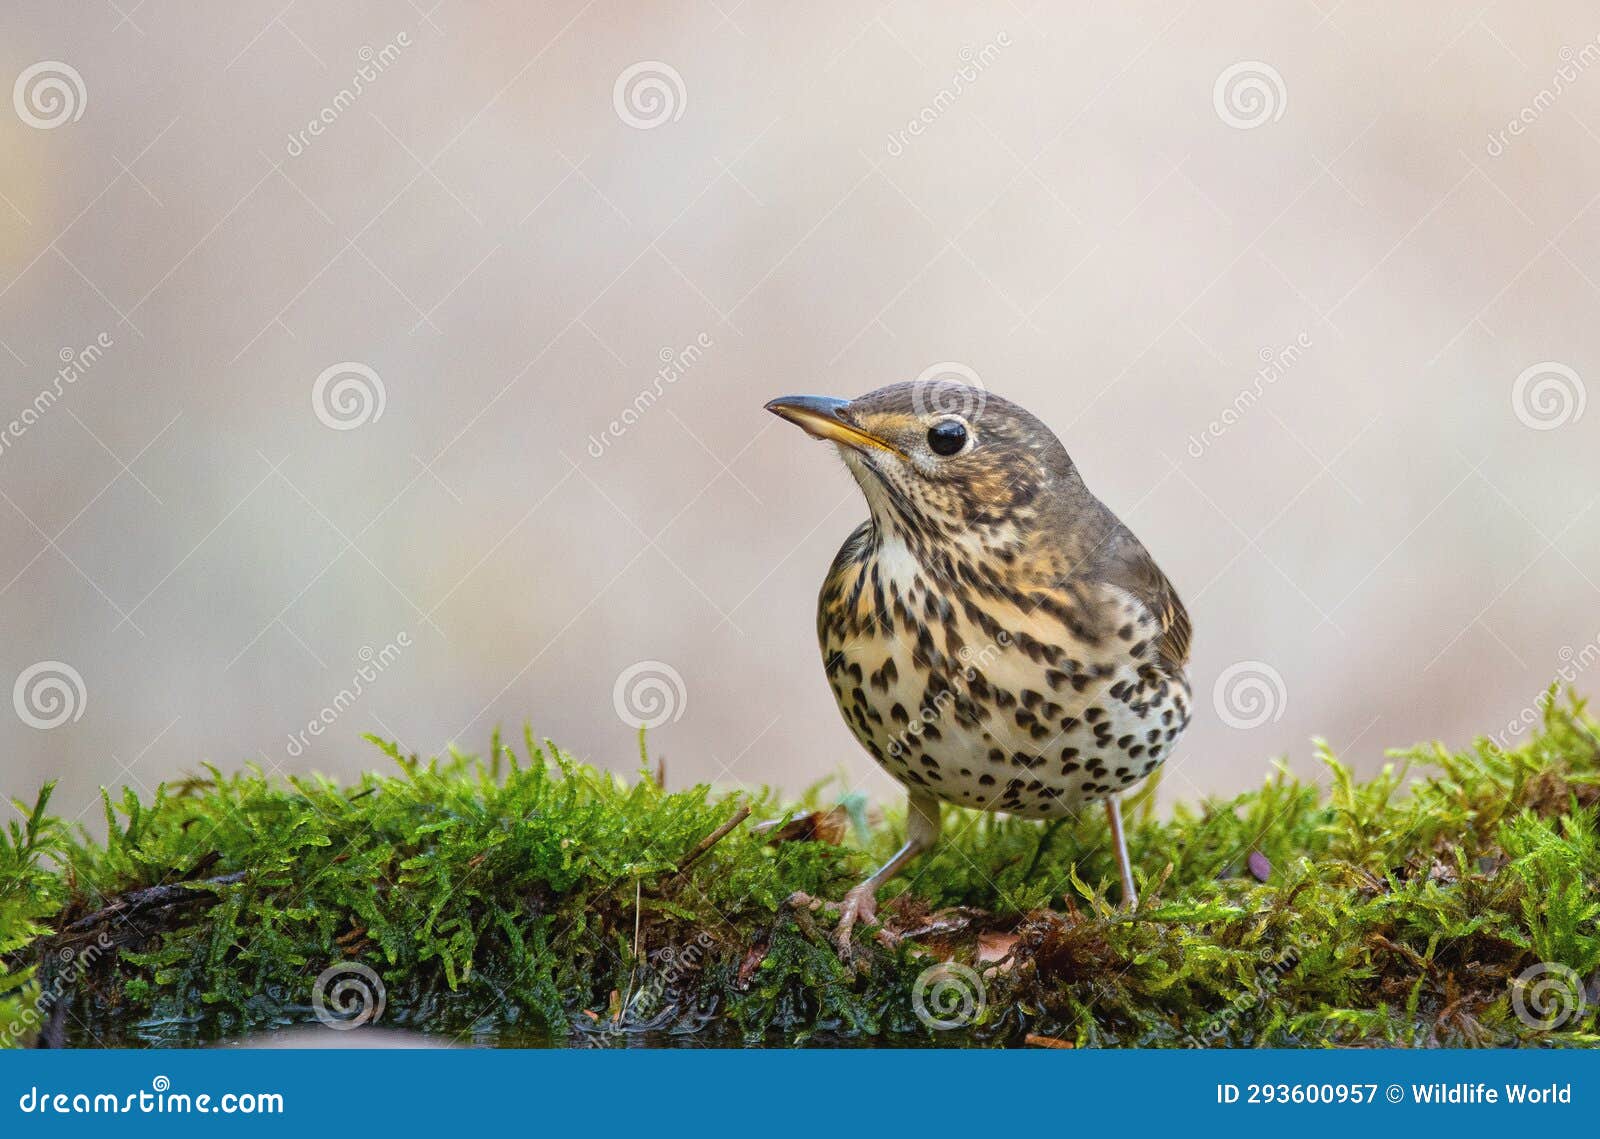 song trush turdus philomelos on the forest puddle